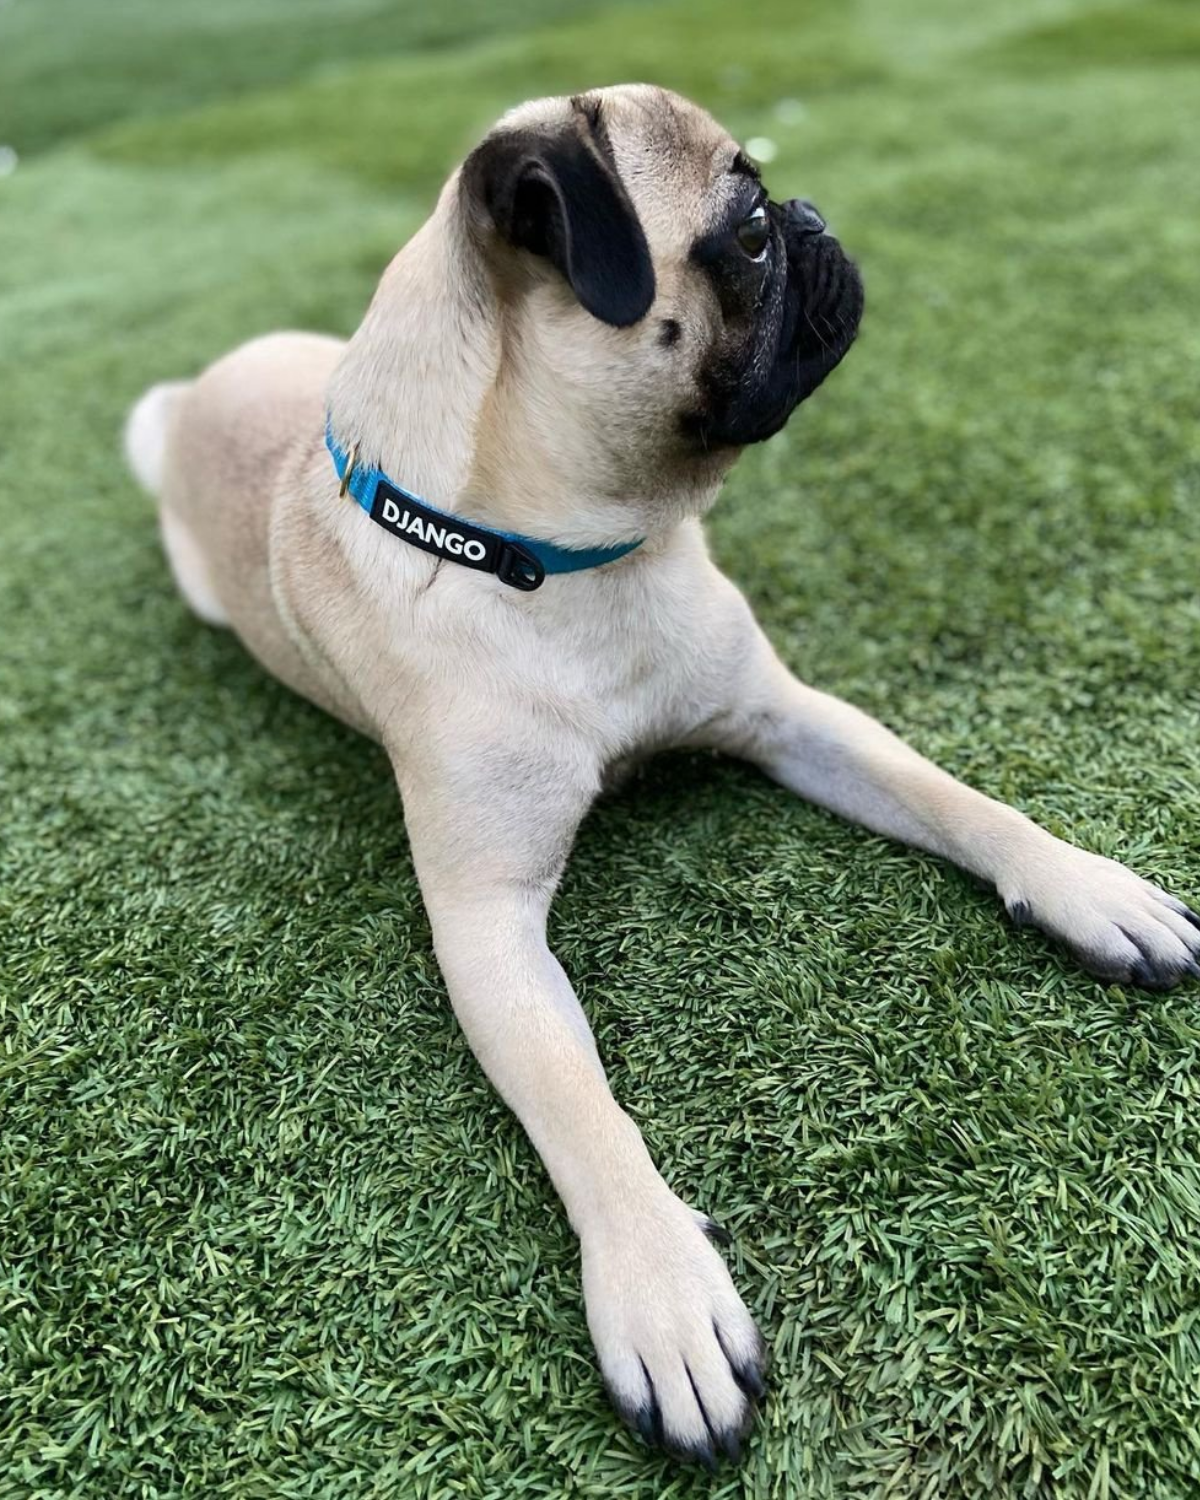 DJANGO Adventure Dog Collar in Pacific Blue on Kona the pug - Modern, durable, and stylish collar for small and medium dogs and puppies with solid cast brass hardware - djangobrand.com